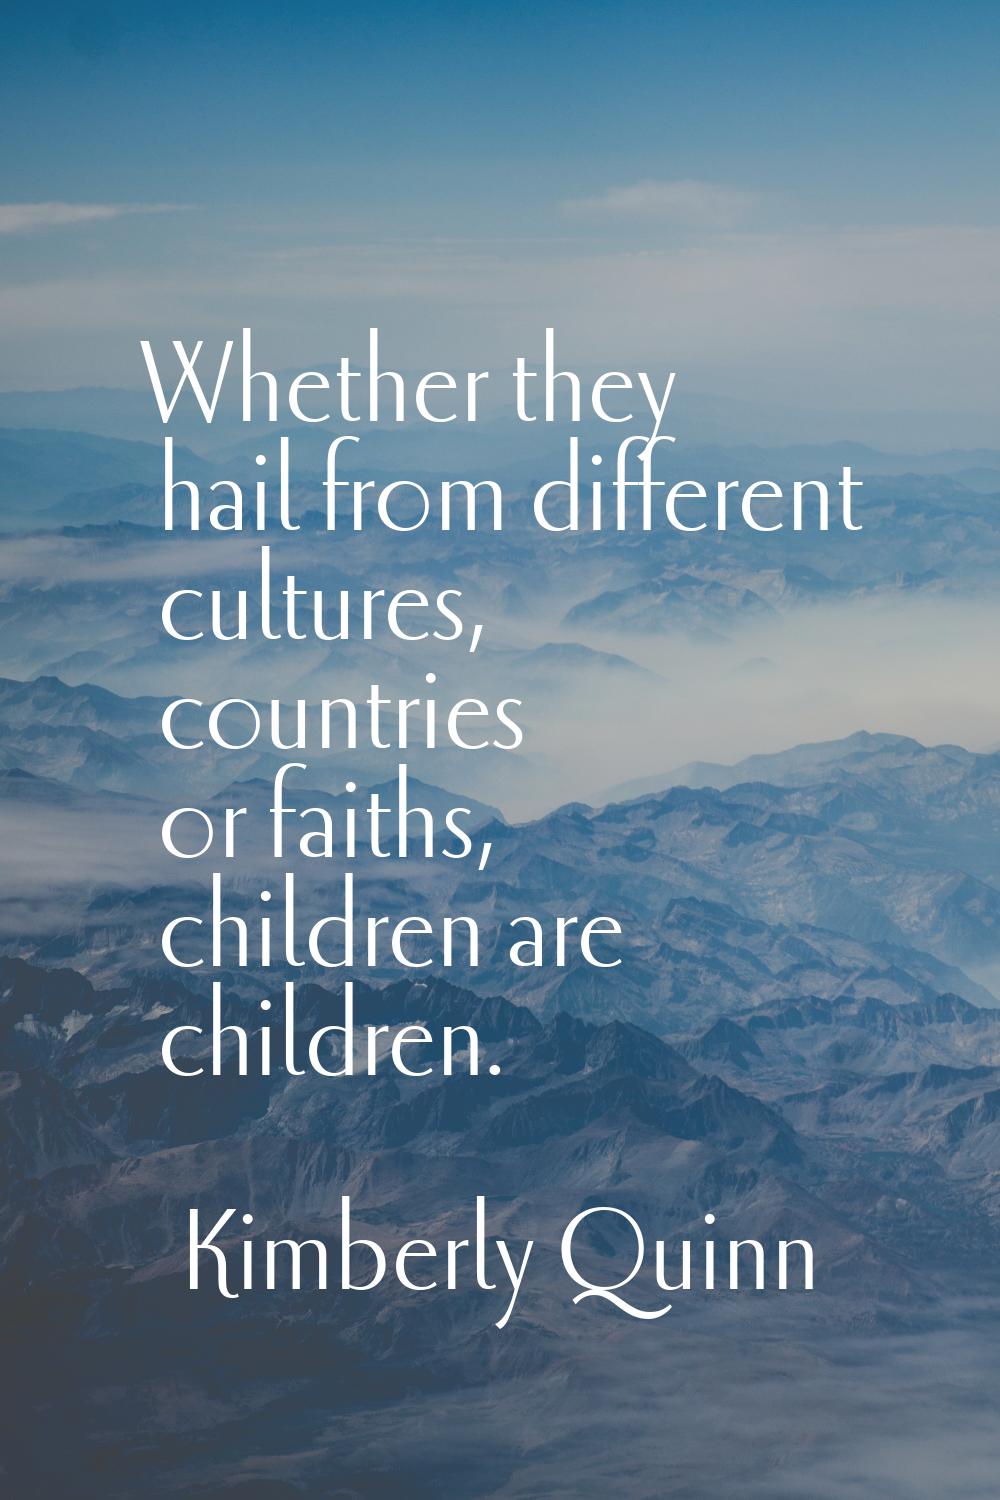 Whether they hail from different cultures, countries or faiths, children are children.